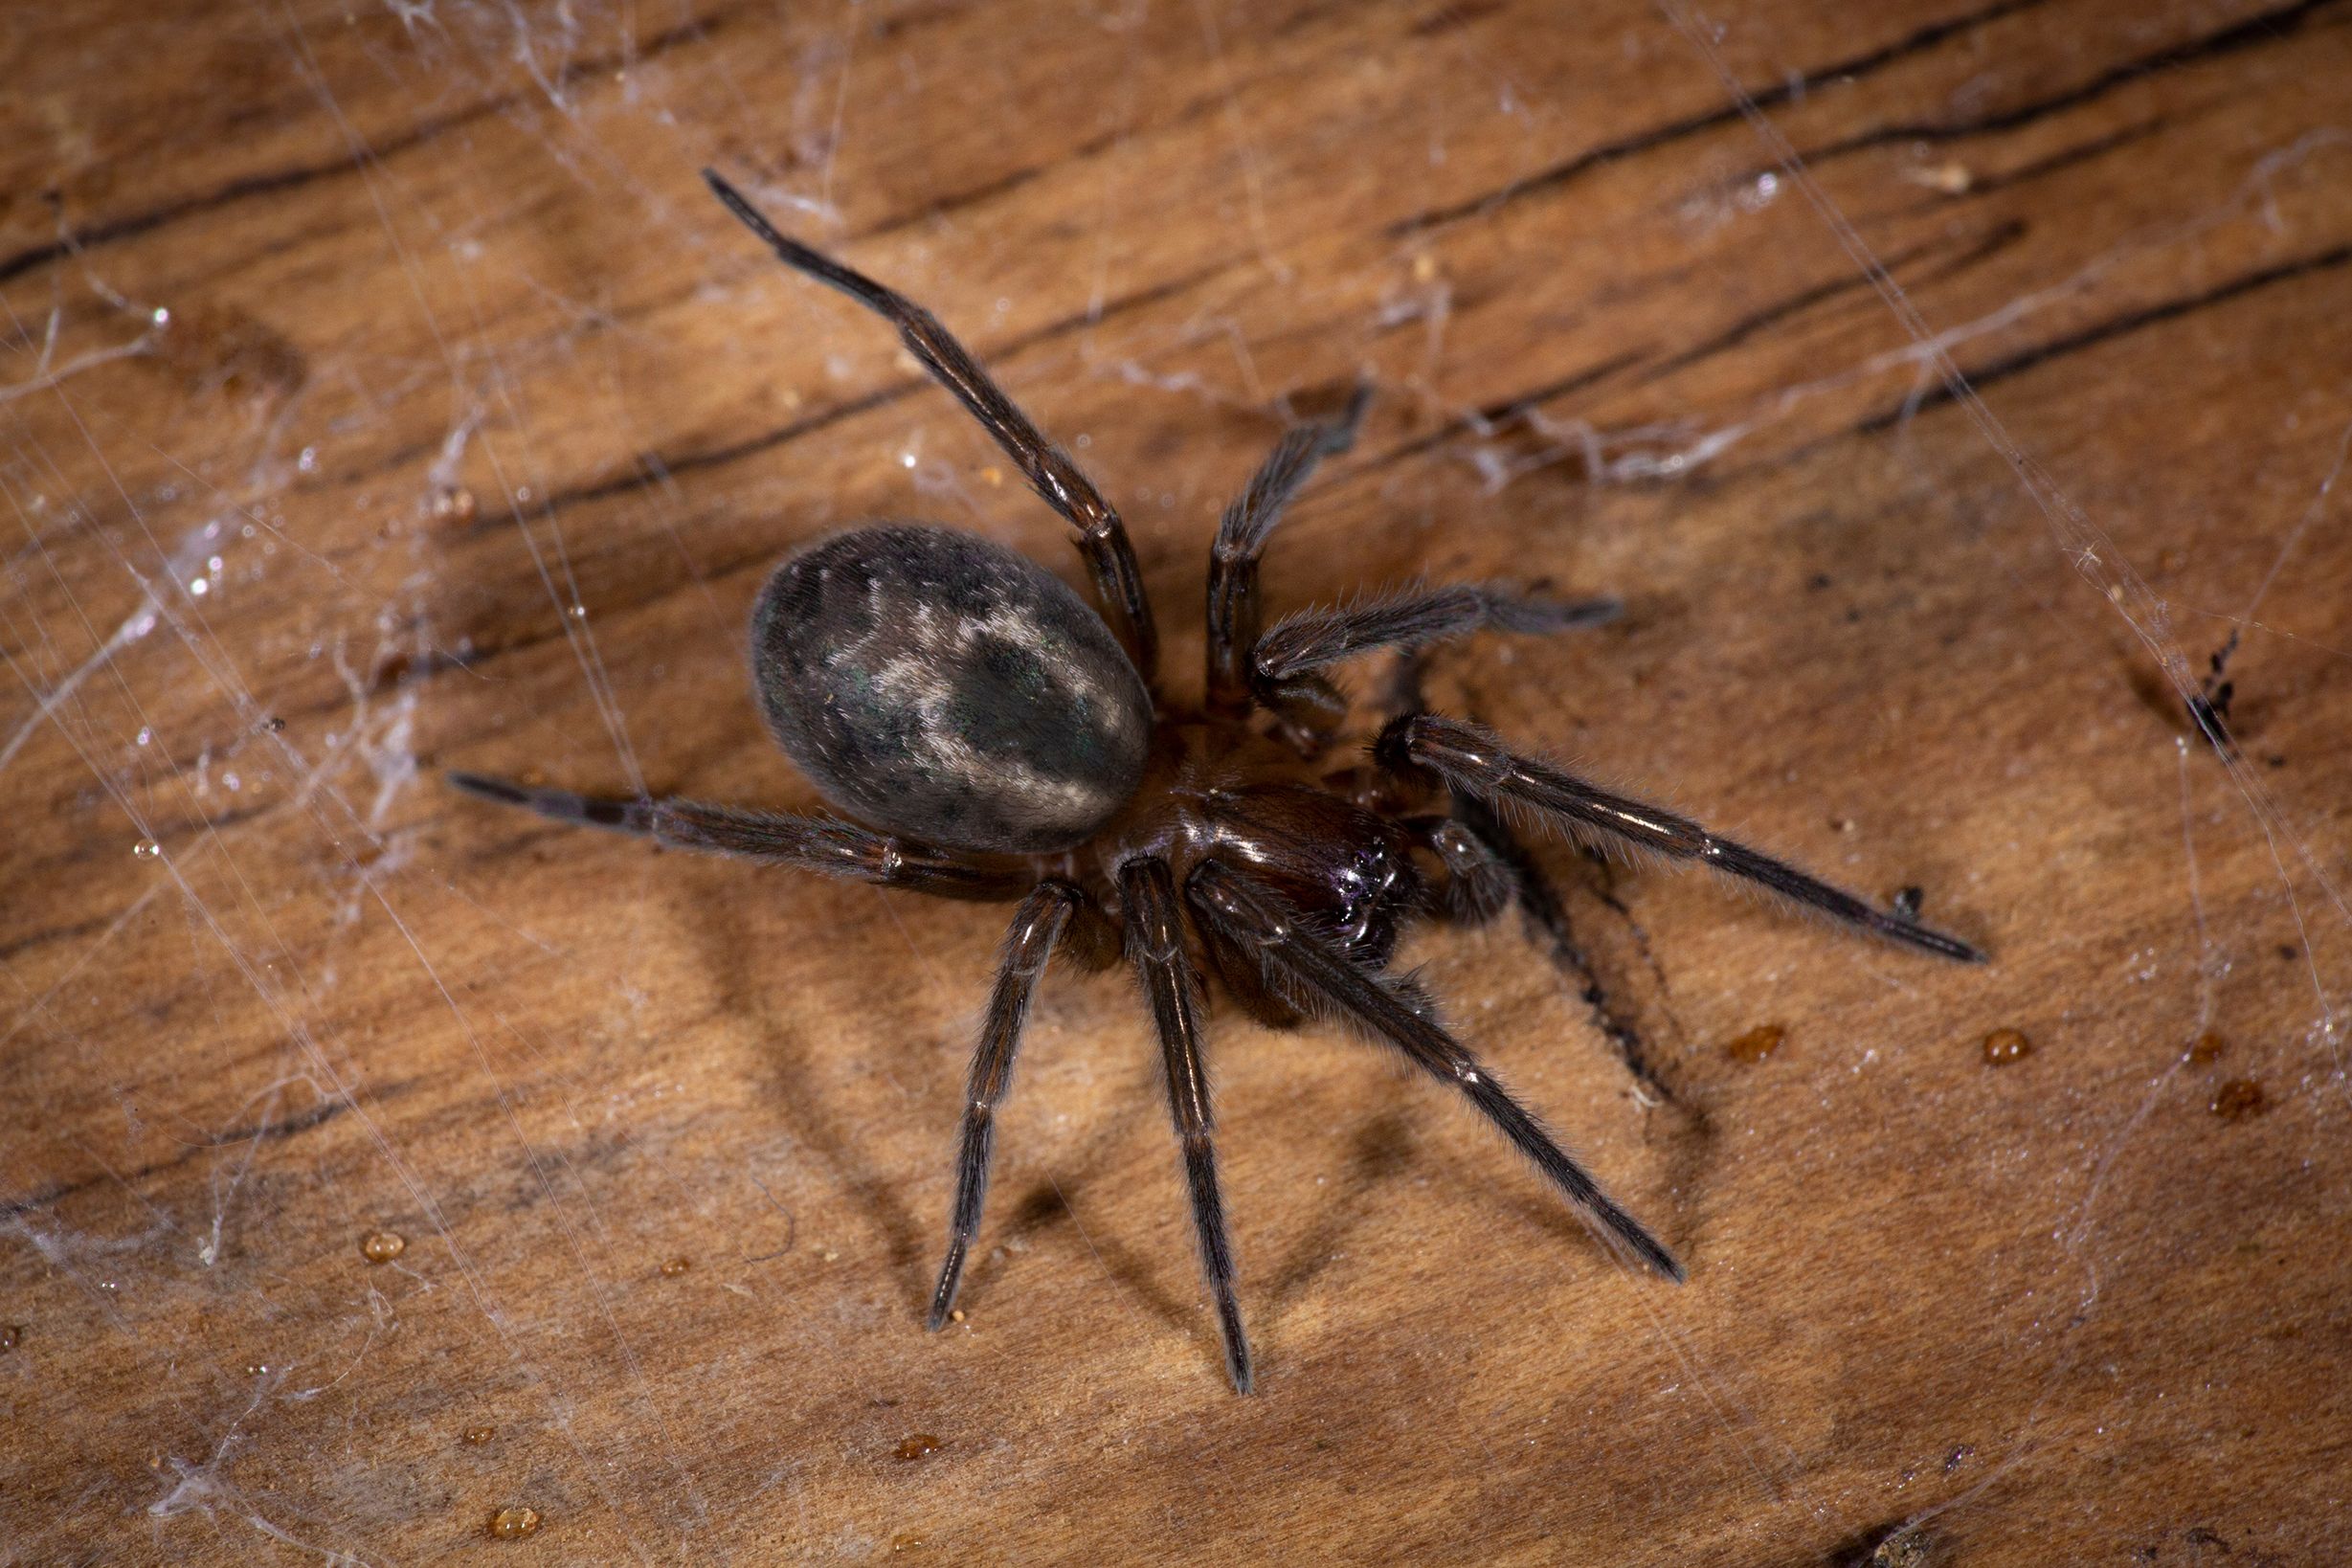 The Definitive List of UK Spiders